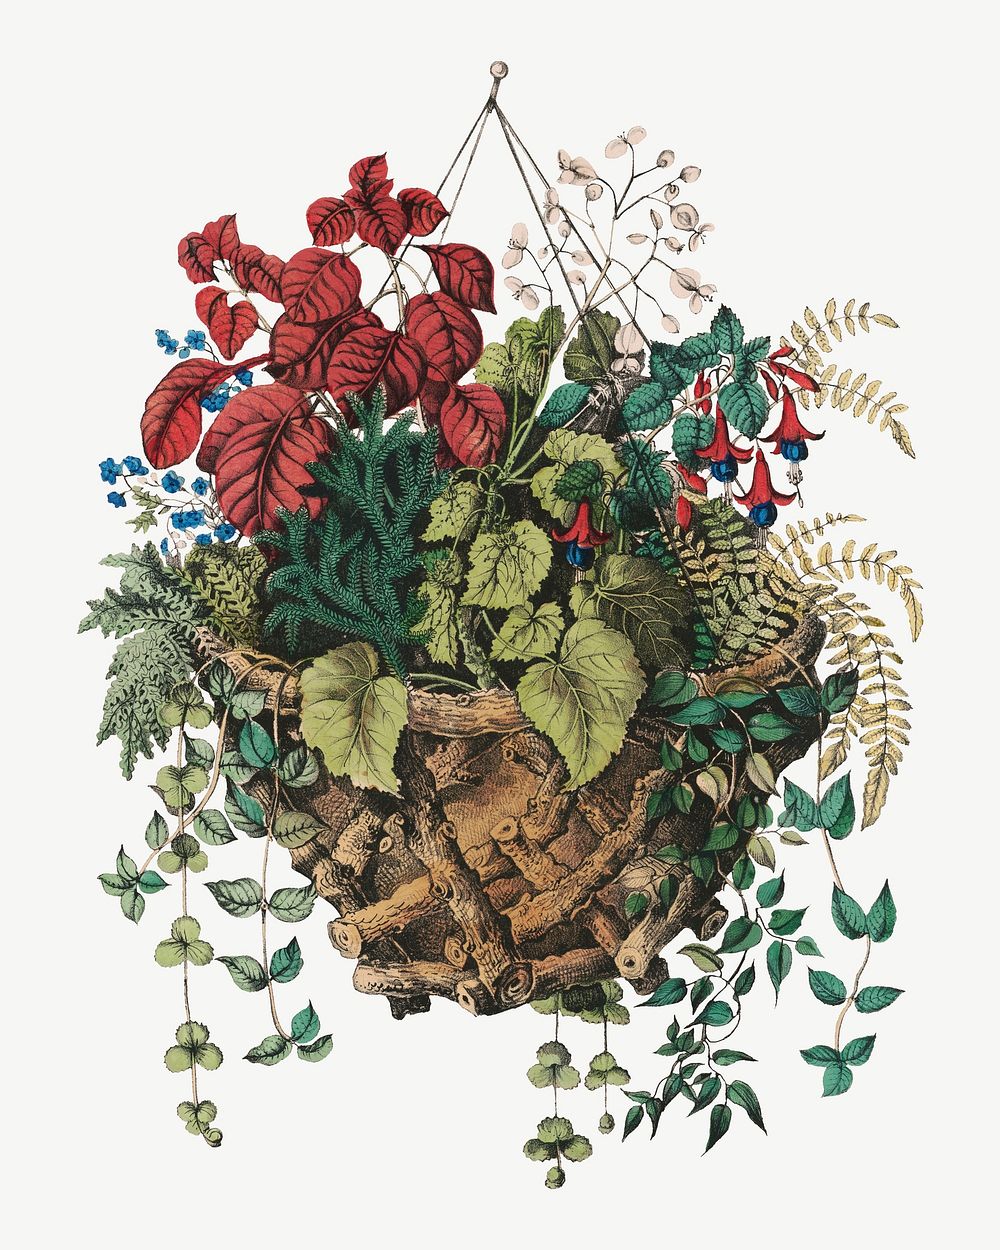 Rustic basket, vintage botanical illustration by Currier & Ives psd. Remixed by rawpixel.